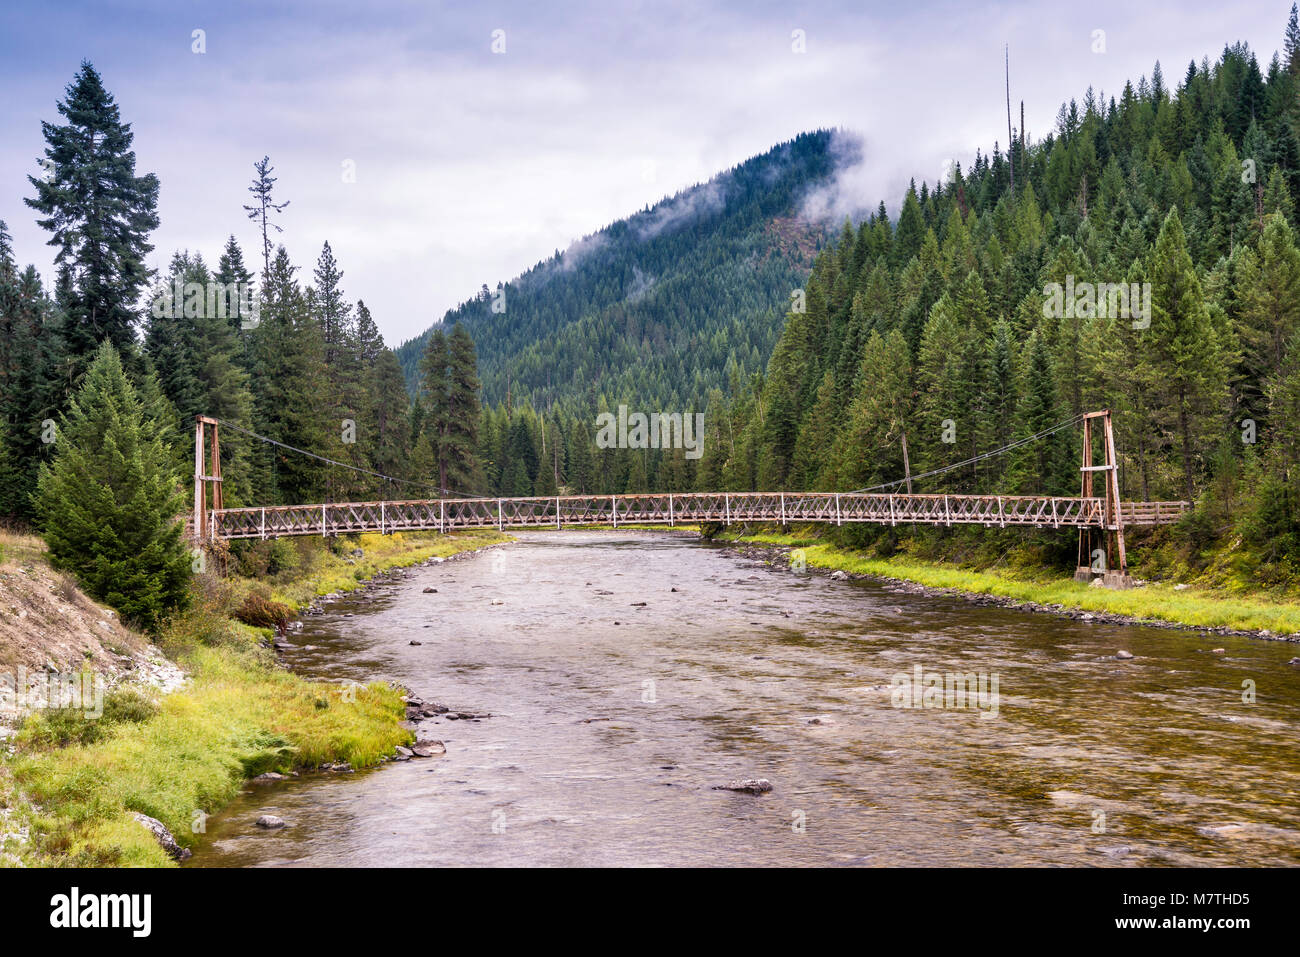 Suspension bridge over Lochsa River, for foot and pack horse access, Northwest Passage Scenic Byway, Clearwater National Forest, Idaho, USA Stock Photo